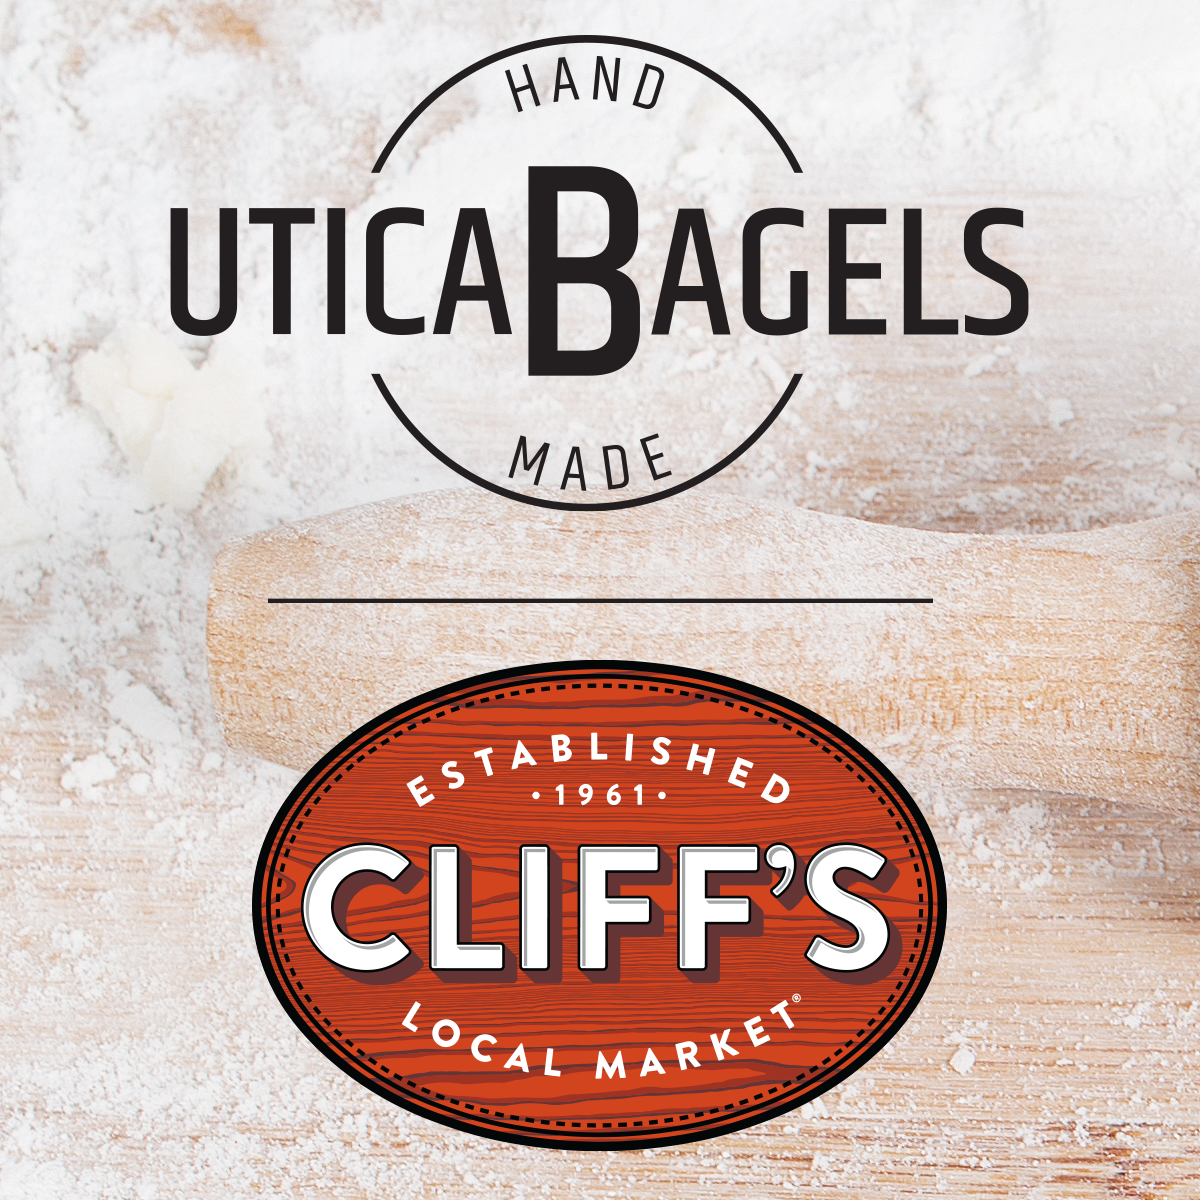 Utica Bagels are now available at Cliff’s Local Market!